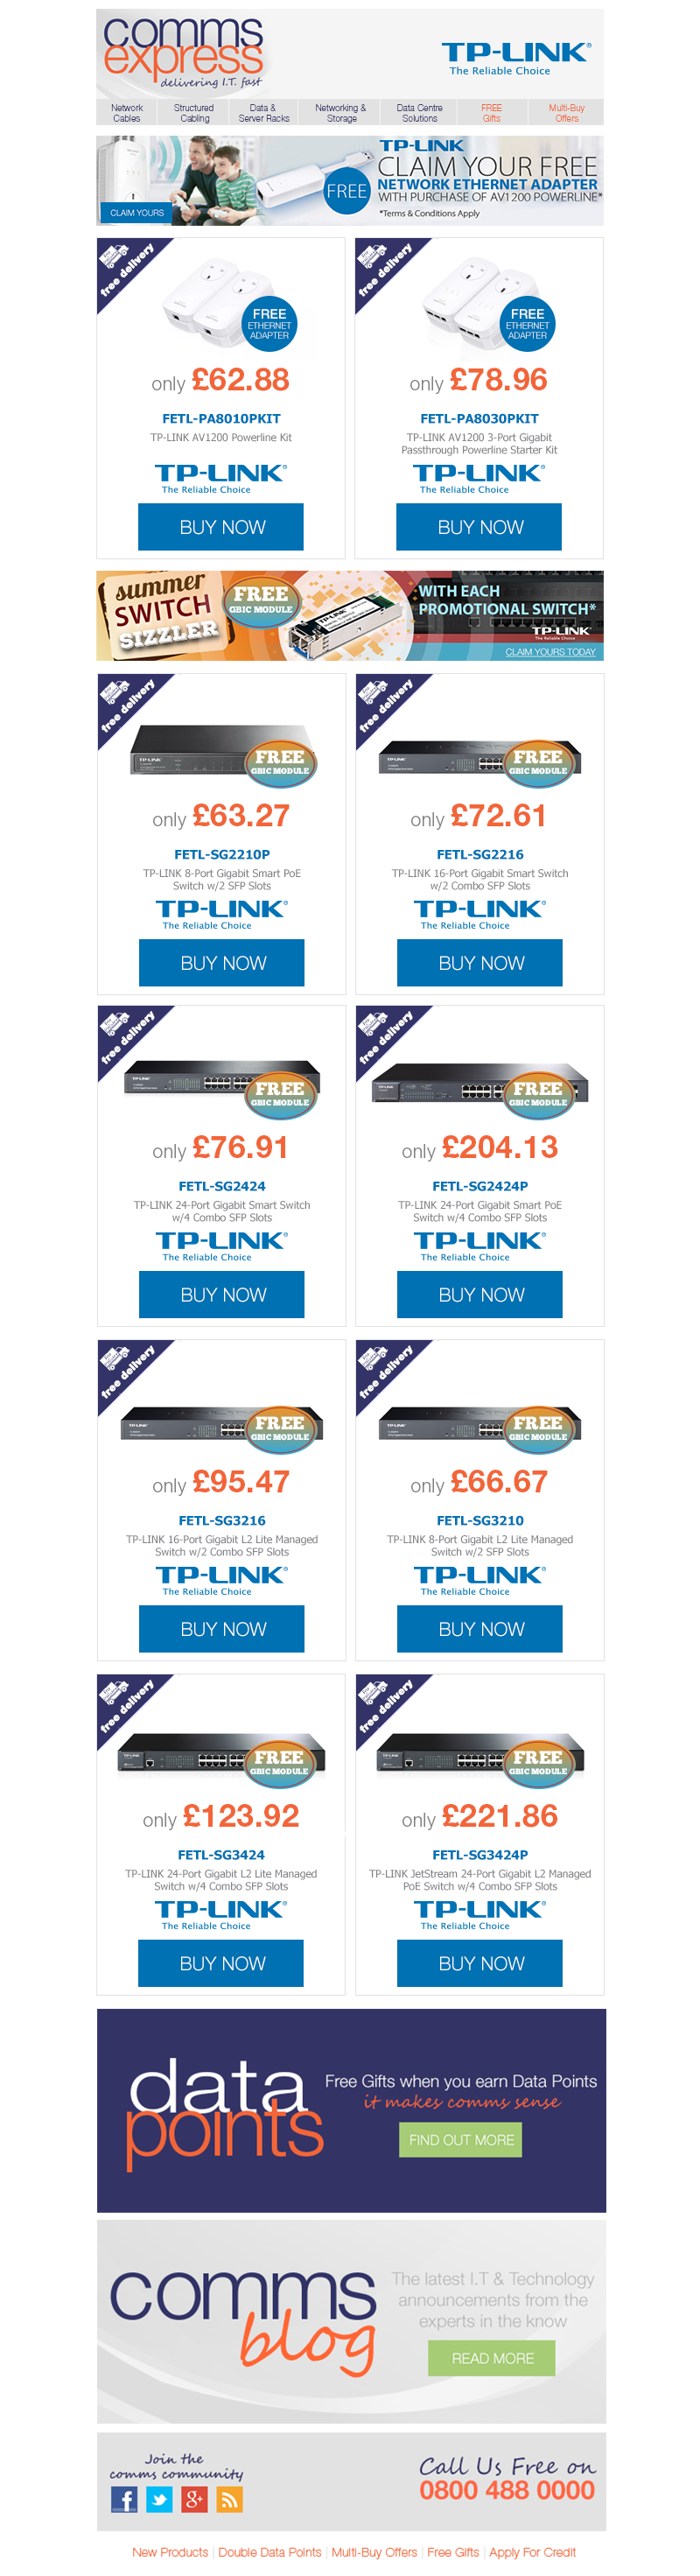 CLAIM YOUR FREE TP LINK Ethernet Adapter or GBic Module